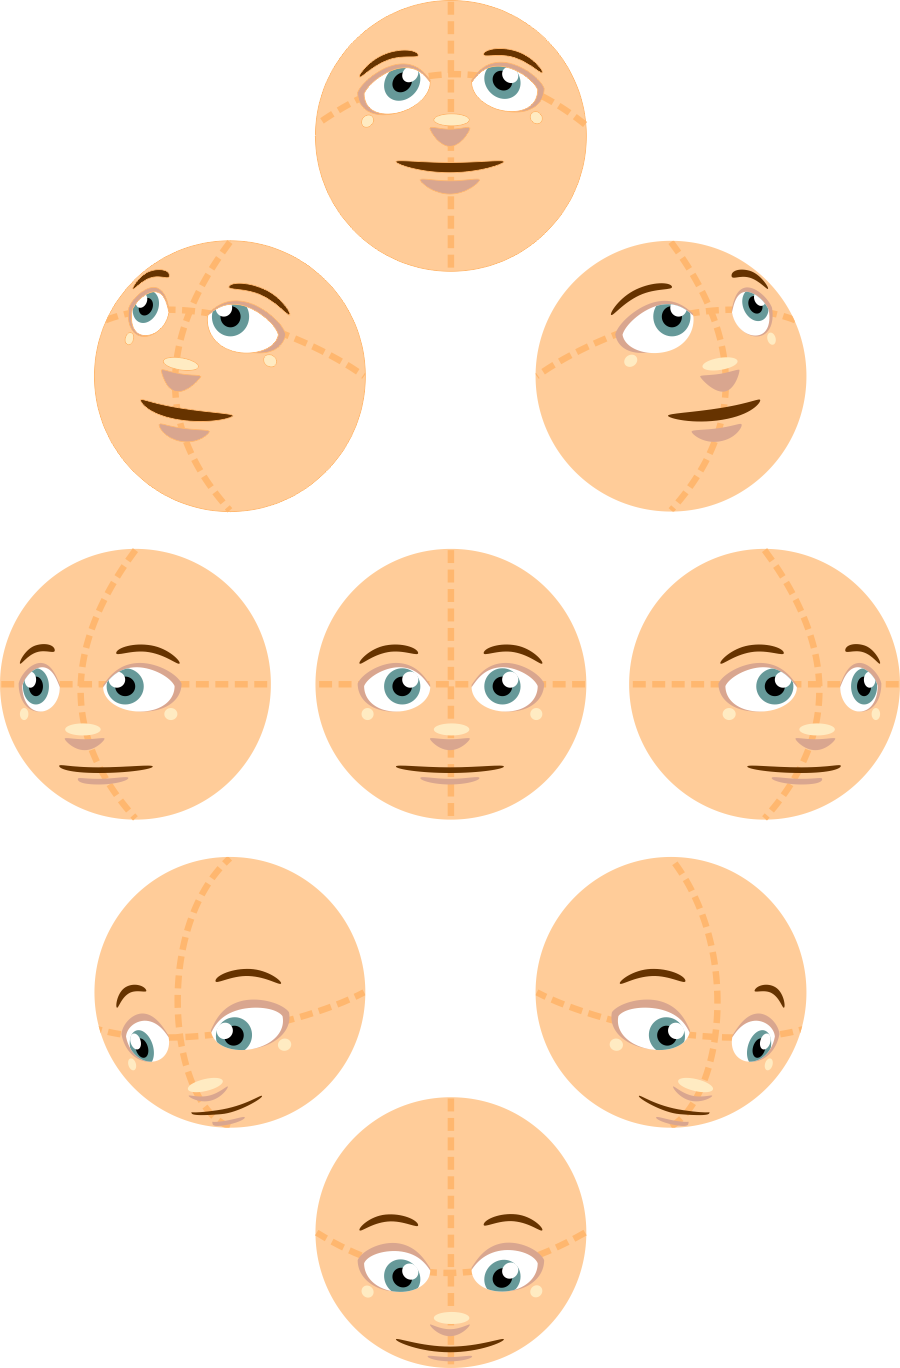 Character design - simpler rotation of a face using basic vector shapes